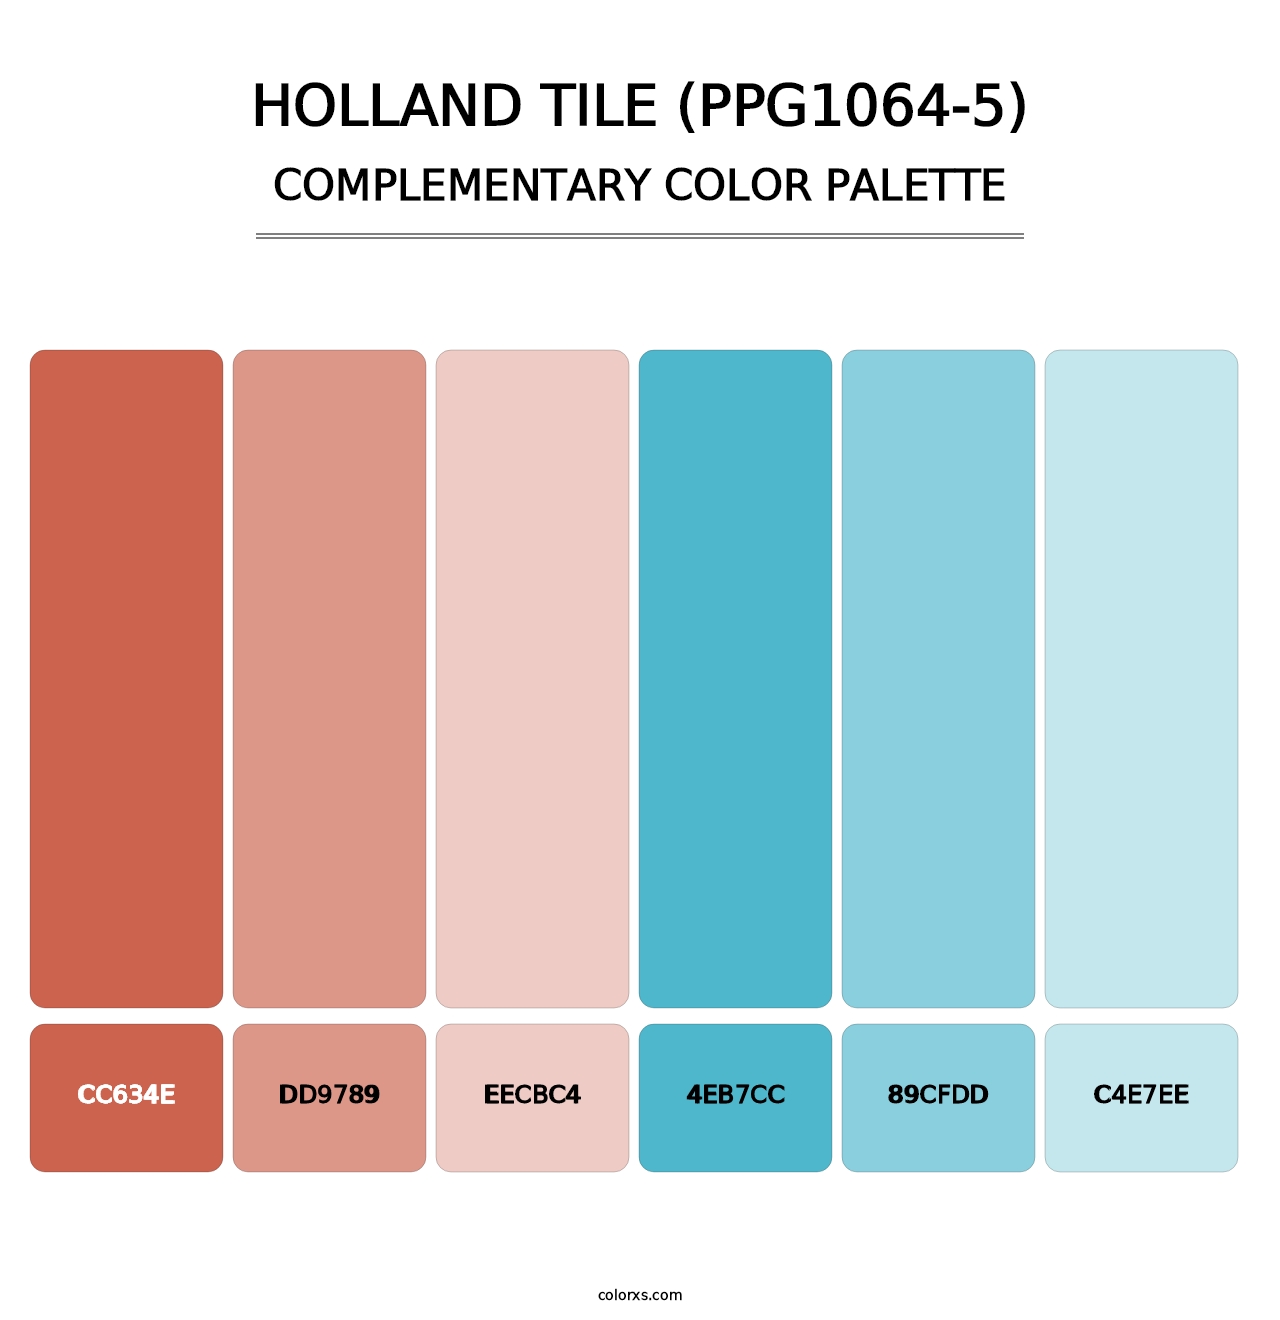 Holland Tile (PPG1064-5) - Complementary Color Palette